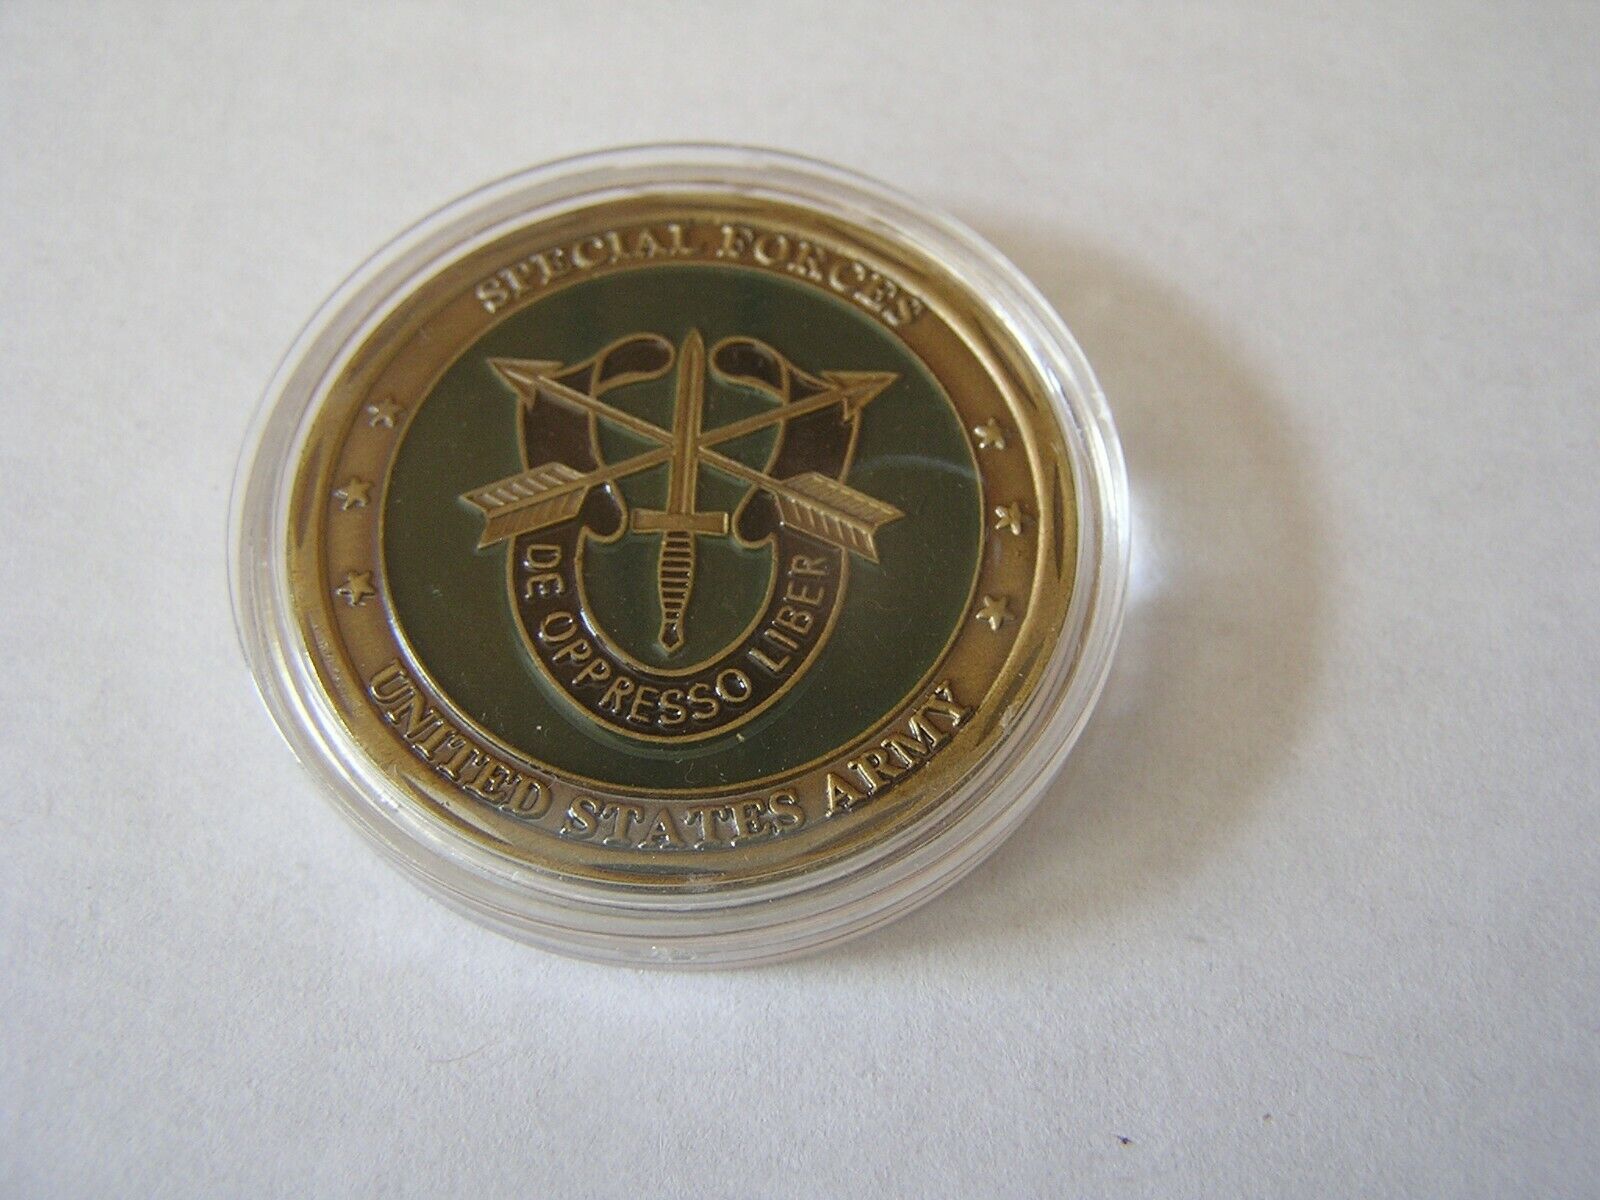 Special Forces GREEN BERET US Army Silent Warrior Challenge Coin